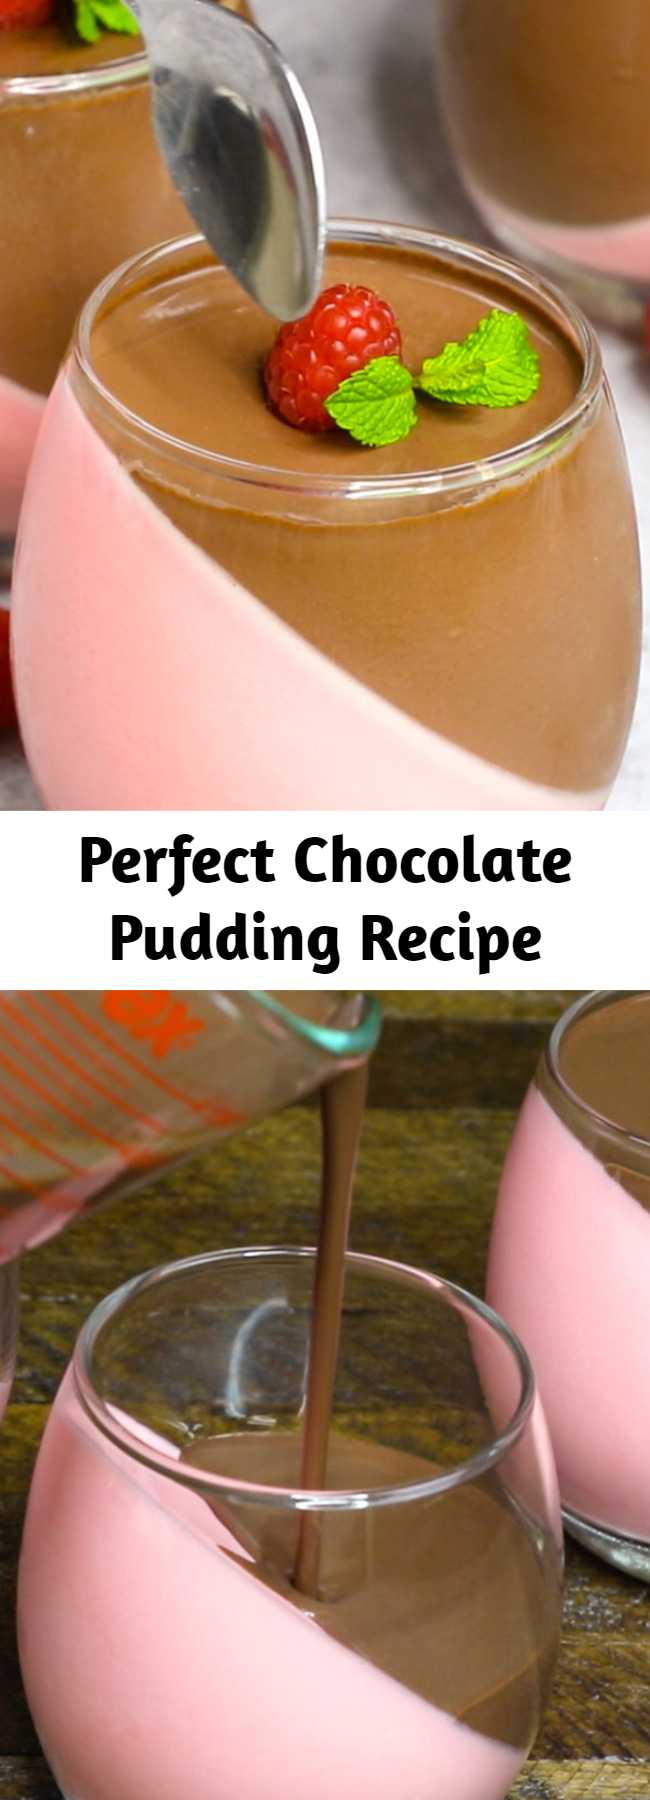 Perfect Chocolate Pudding Recipe - This Homemade Chocolate Pudding is a stunning make-ahead mouthwatering dessert that’s creamy and smooth. It’s an easy recipe with a few simple ingredients: raspberry jello powder, cool whip, half and half milk, gelatin, unsweet chocolate and sugar.